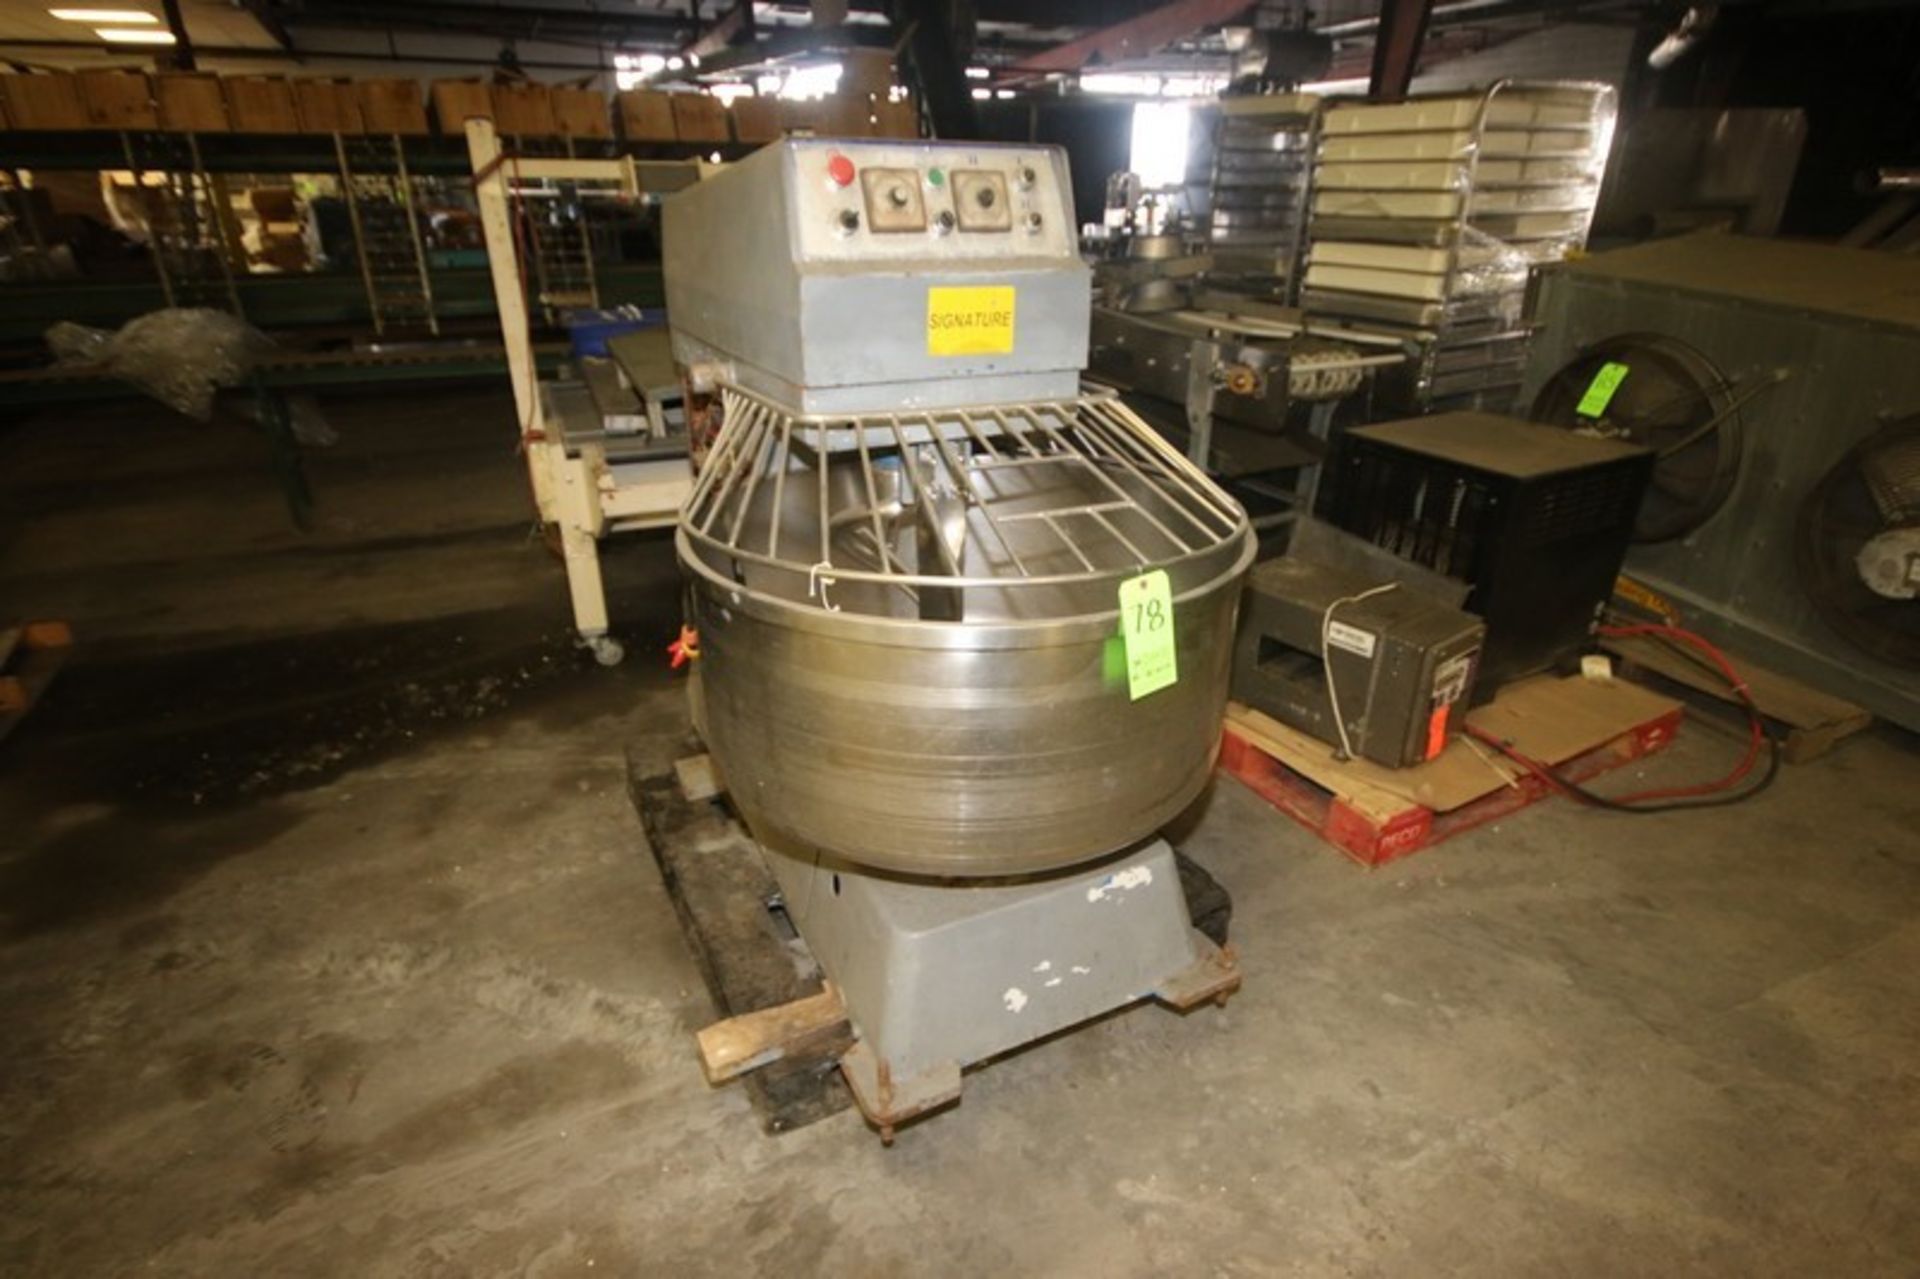 Dough Mixer, with S/S Bowl & S/S Doug Hook, Bowl Dims.: Aprox. 36" Dia., Mounted on Frame (LOCATED